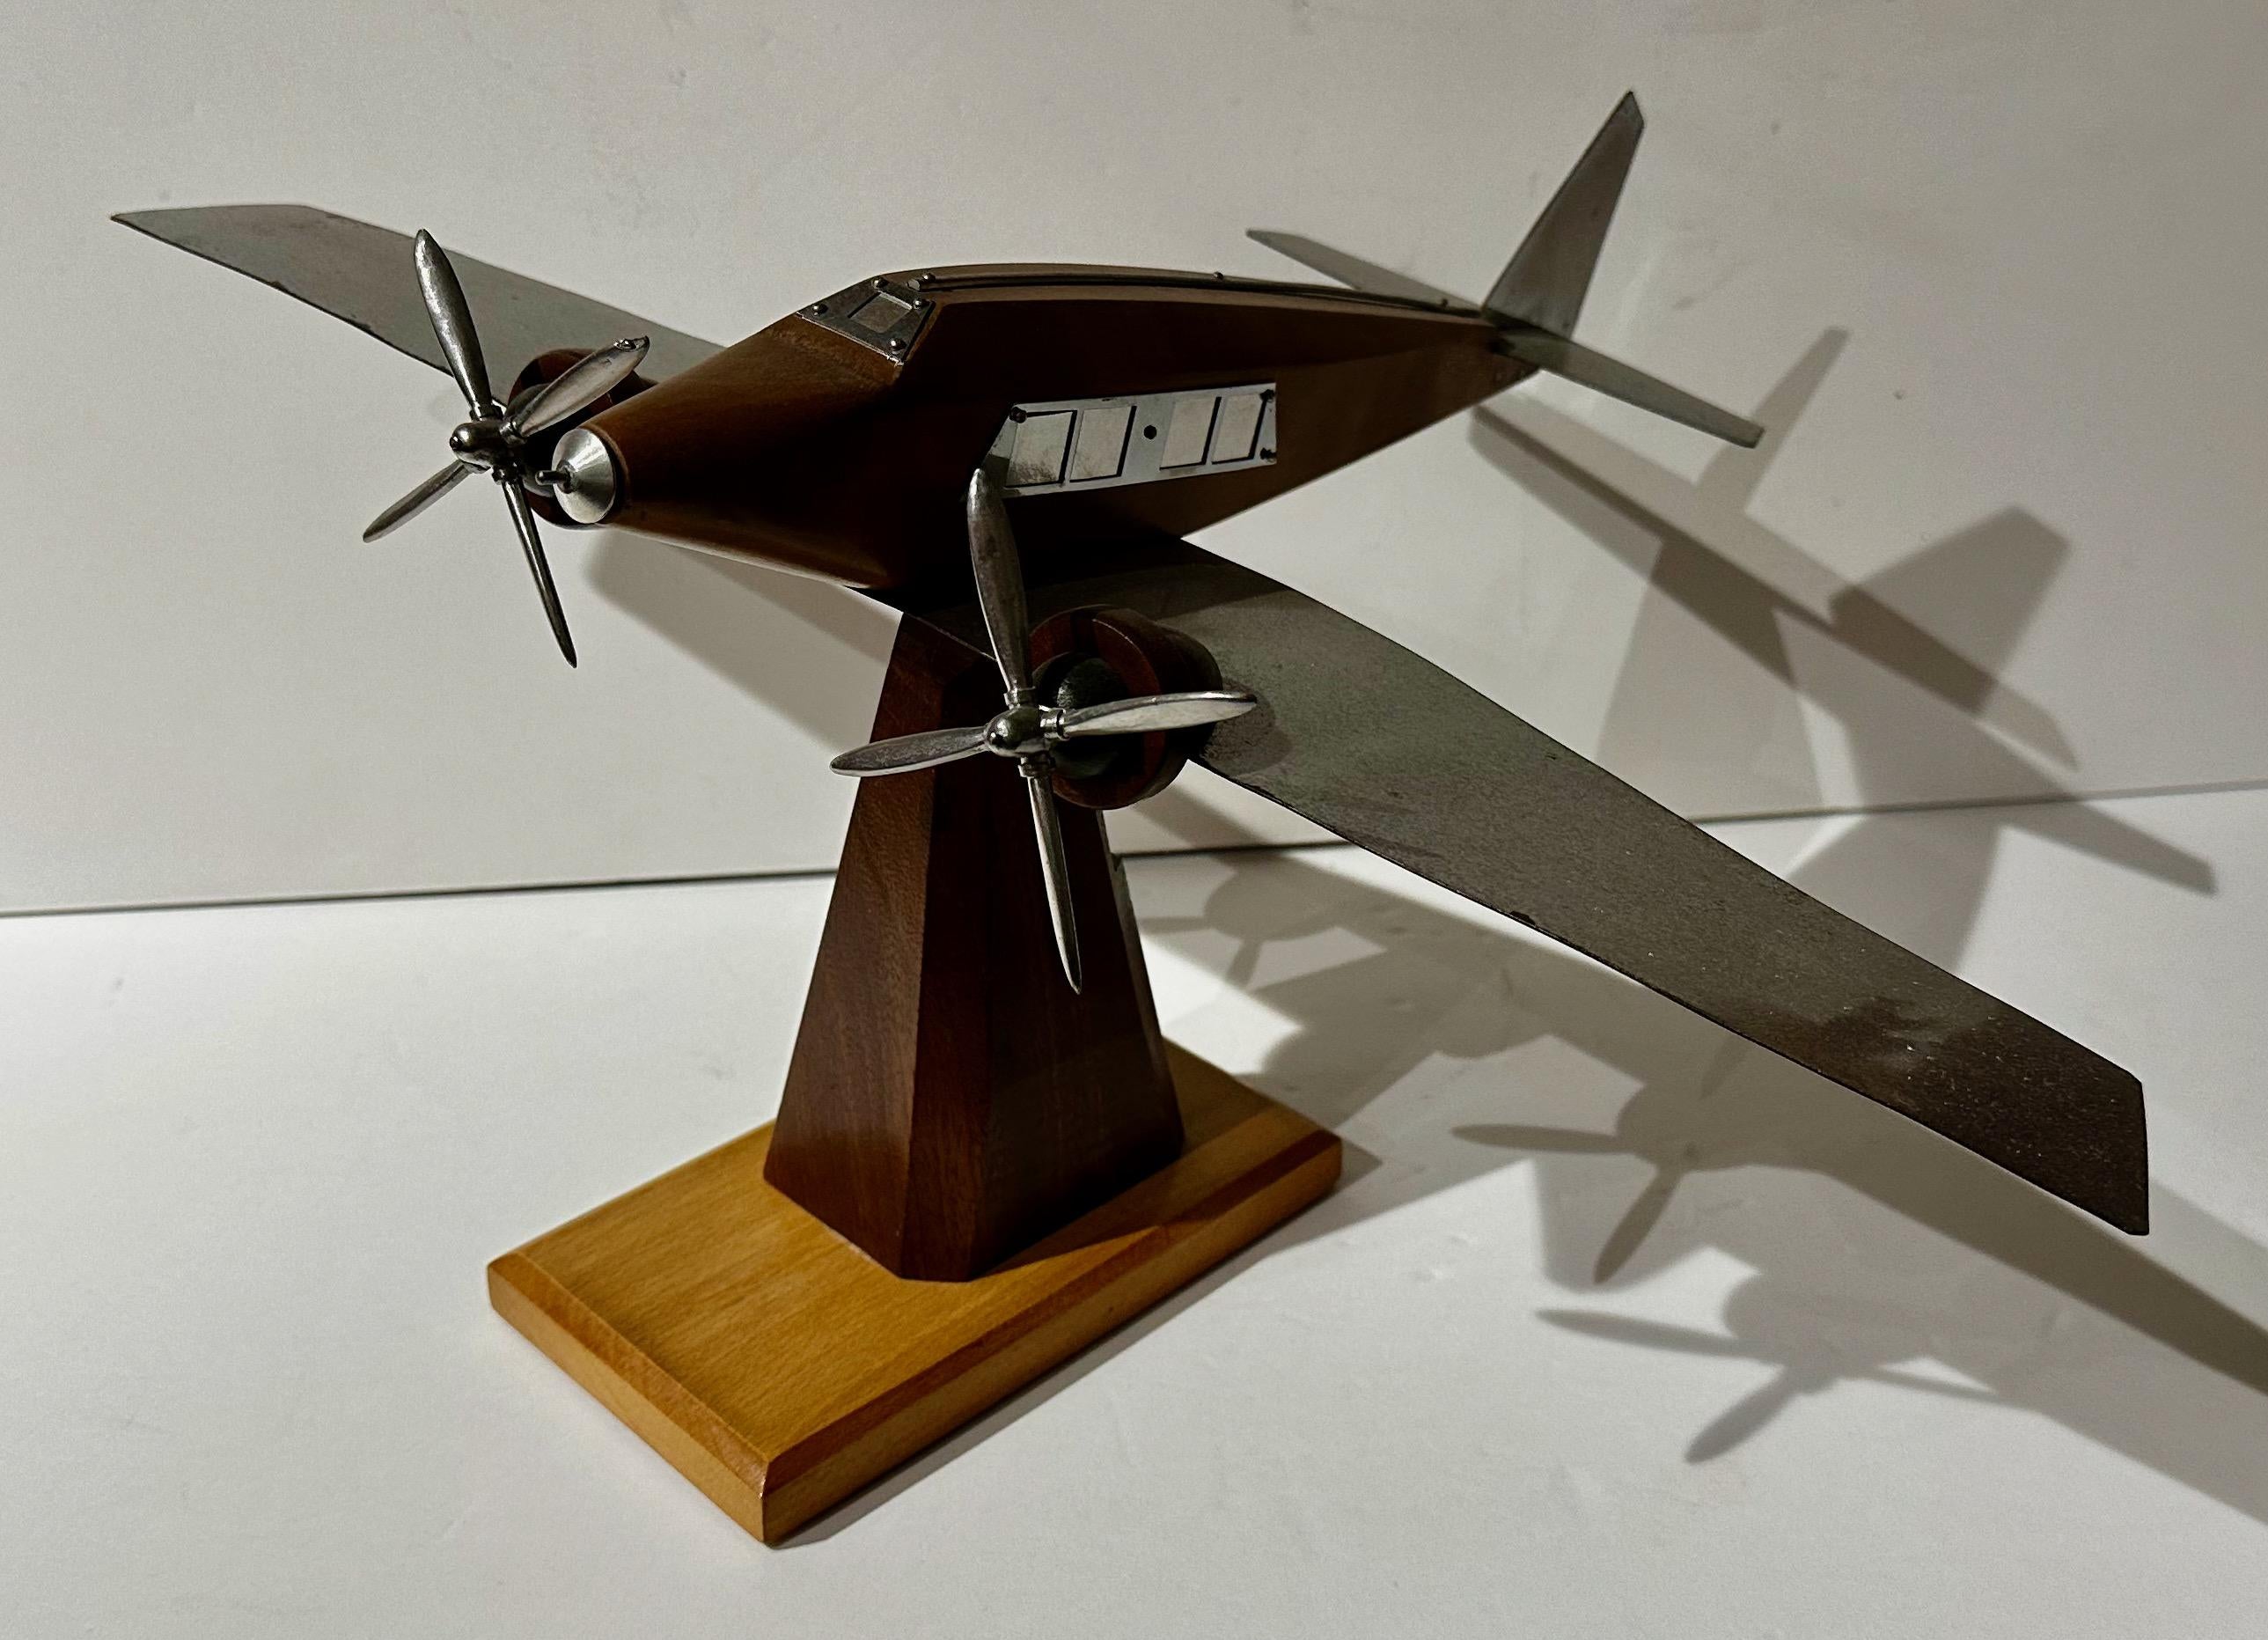 French Model Propeller Airplane Wood Metal Art Deco. Mixed wood with lots of metalwork. Wings, propeller, tail, and windows. Fashioned after The Dewoitine which was an Art Deco 1930s French eight-passenger airliner built by Dewoitine. The Airplane